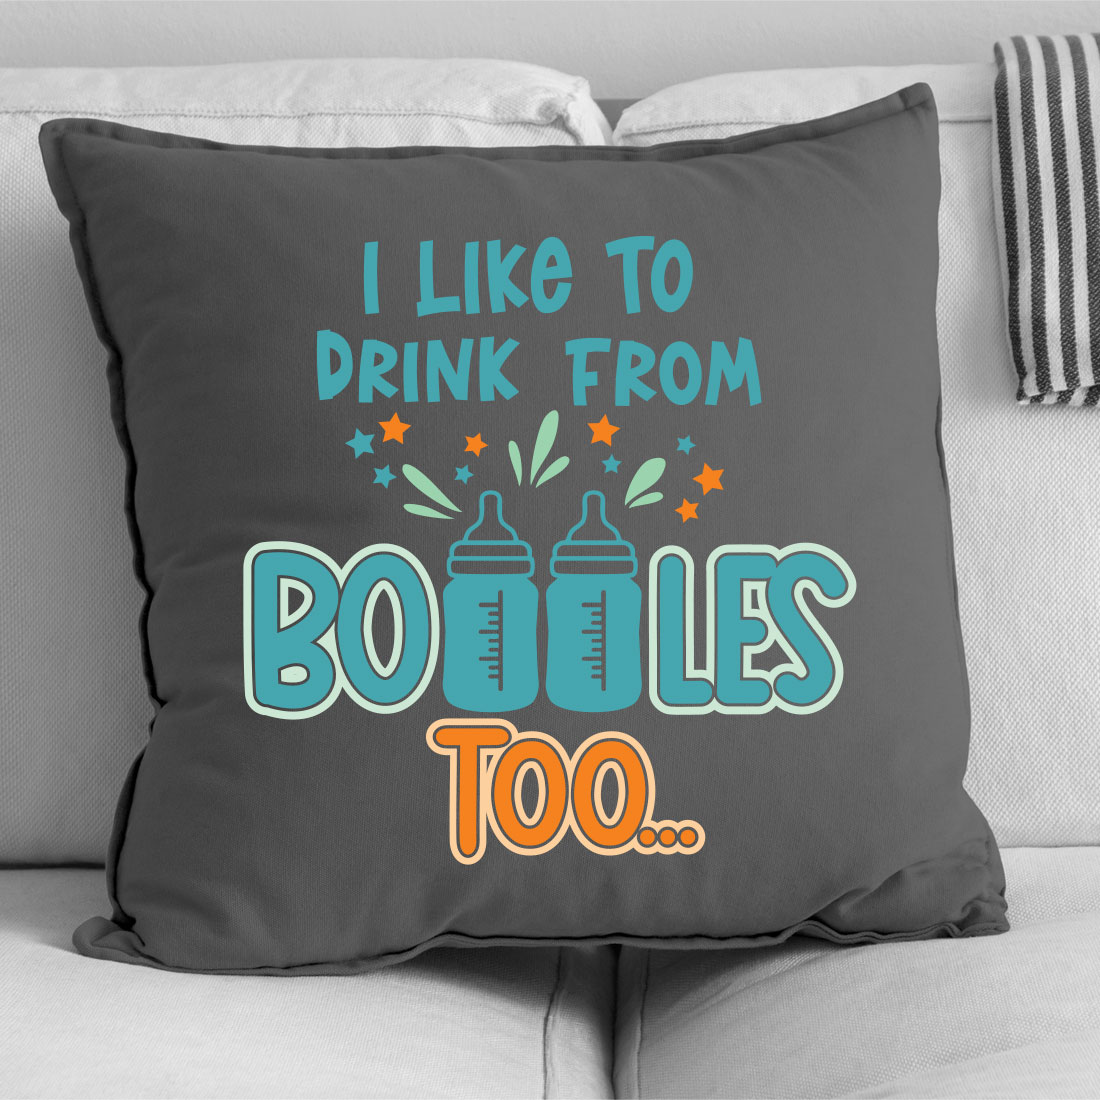 Pillow that says i like to drink from bottles too.